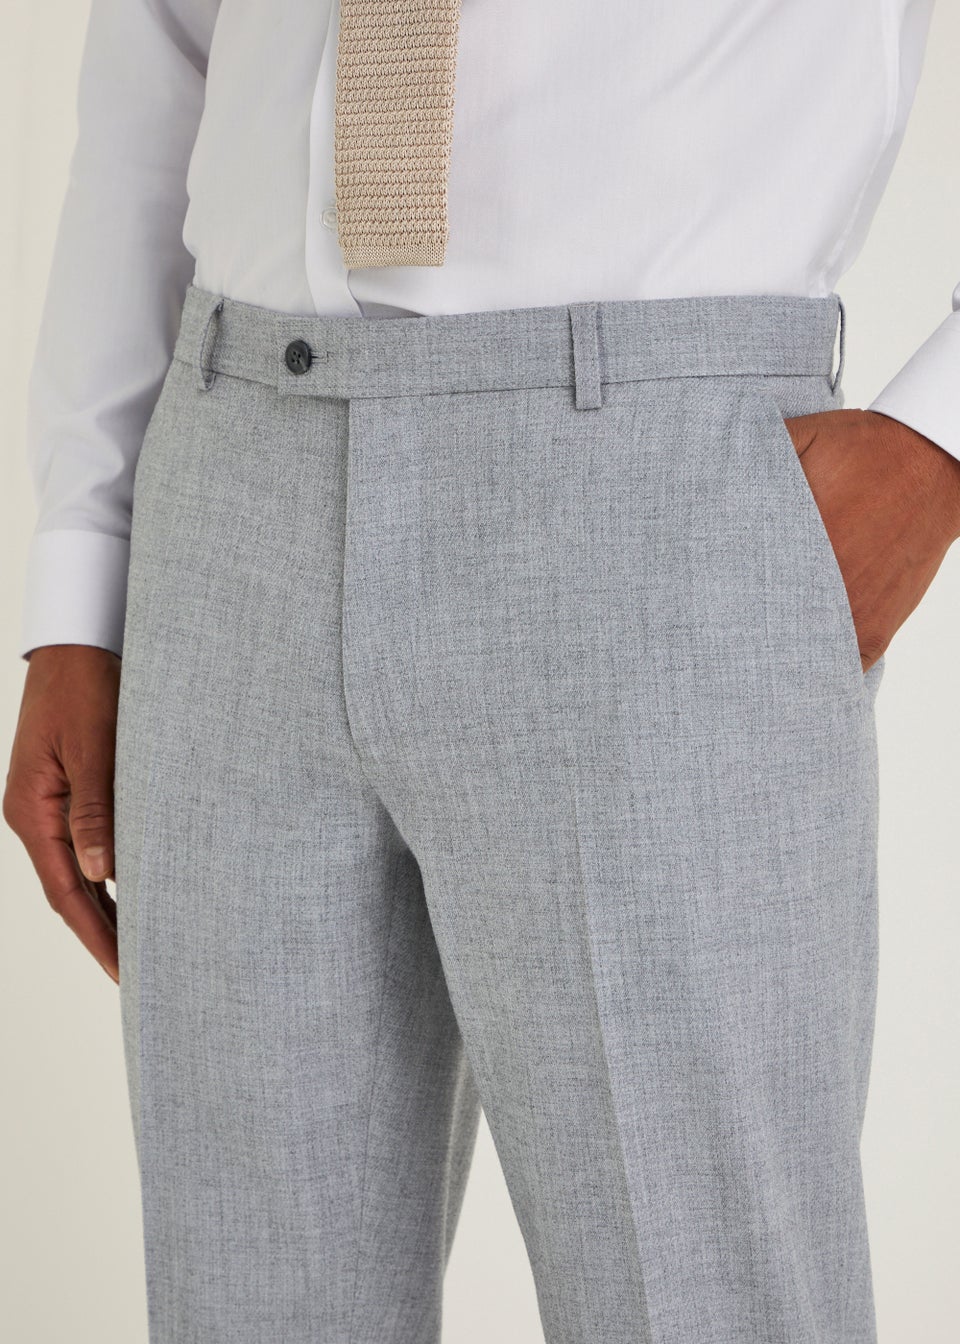 Taylor & Wright Hanks Grey Slim Fit Suit Trousers